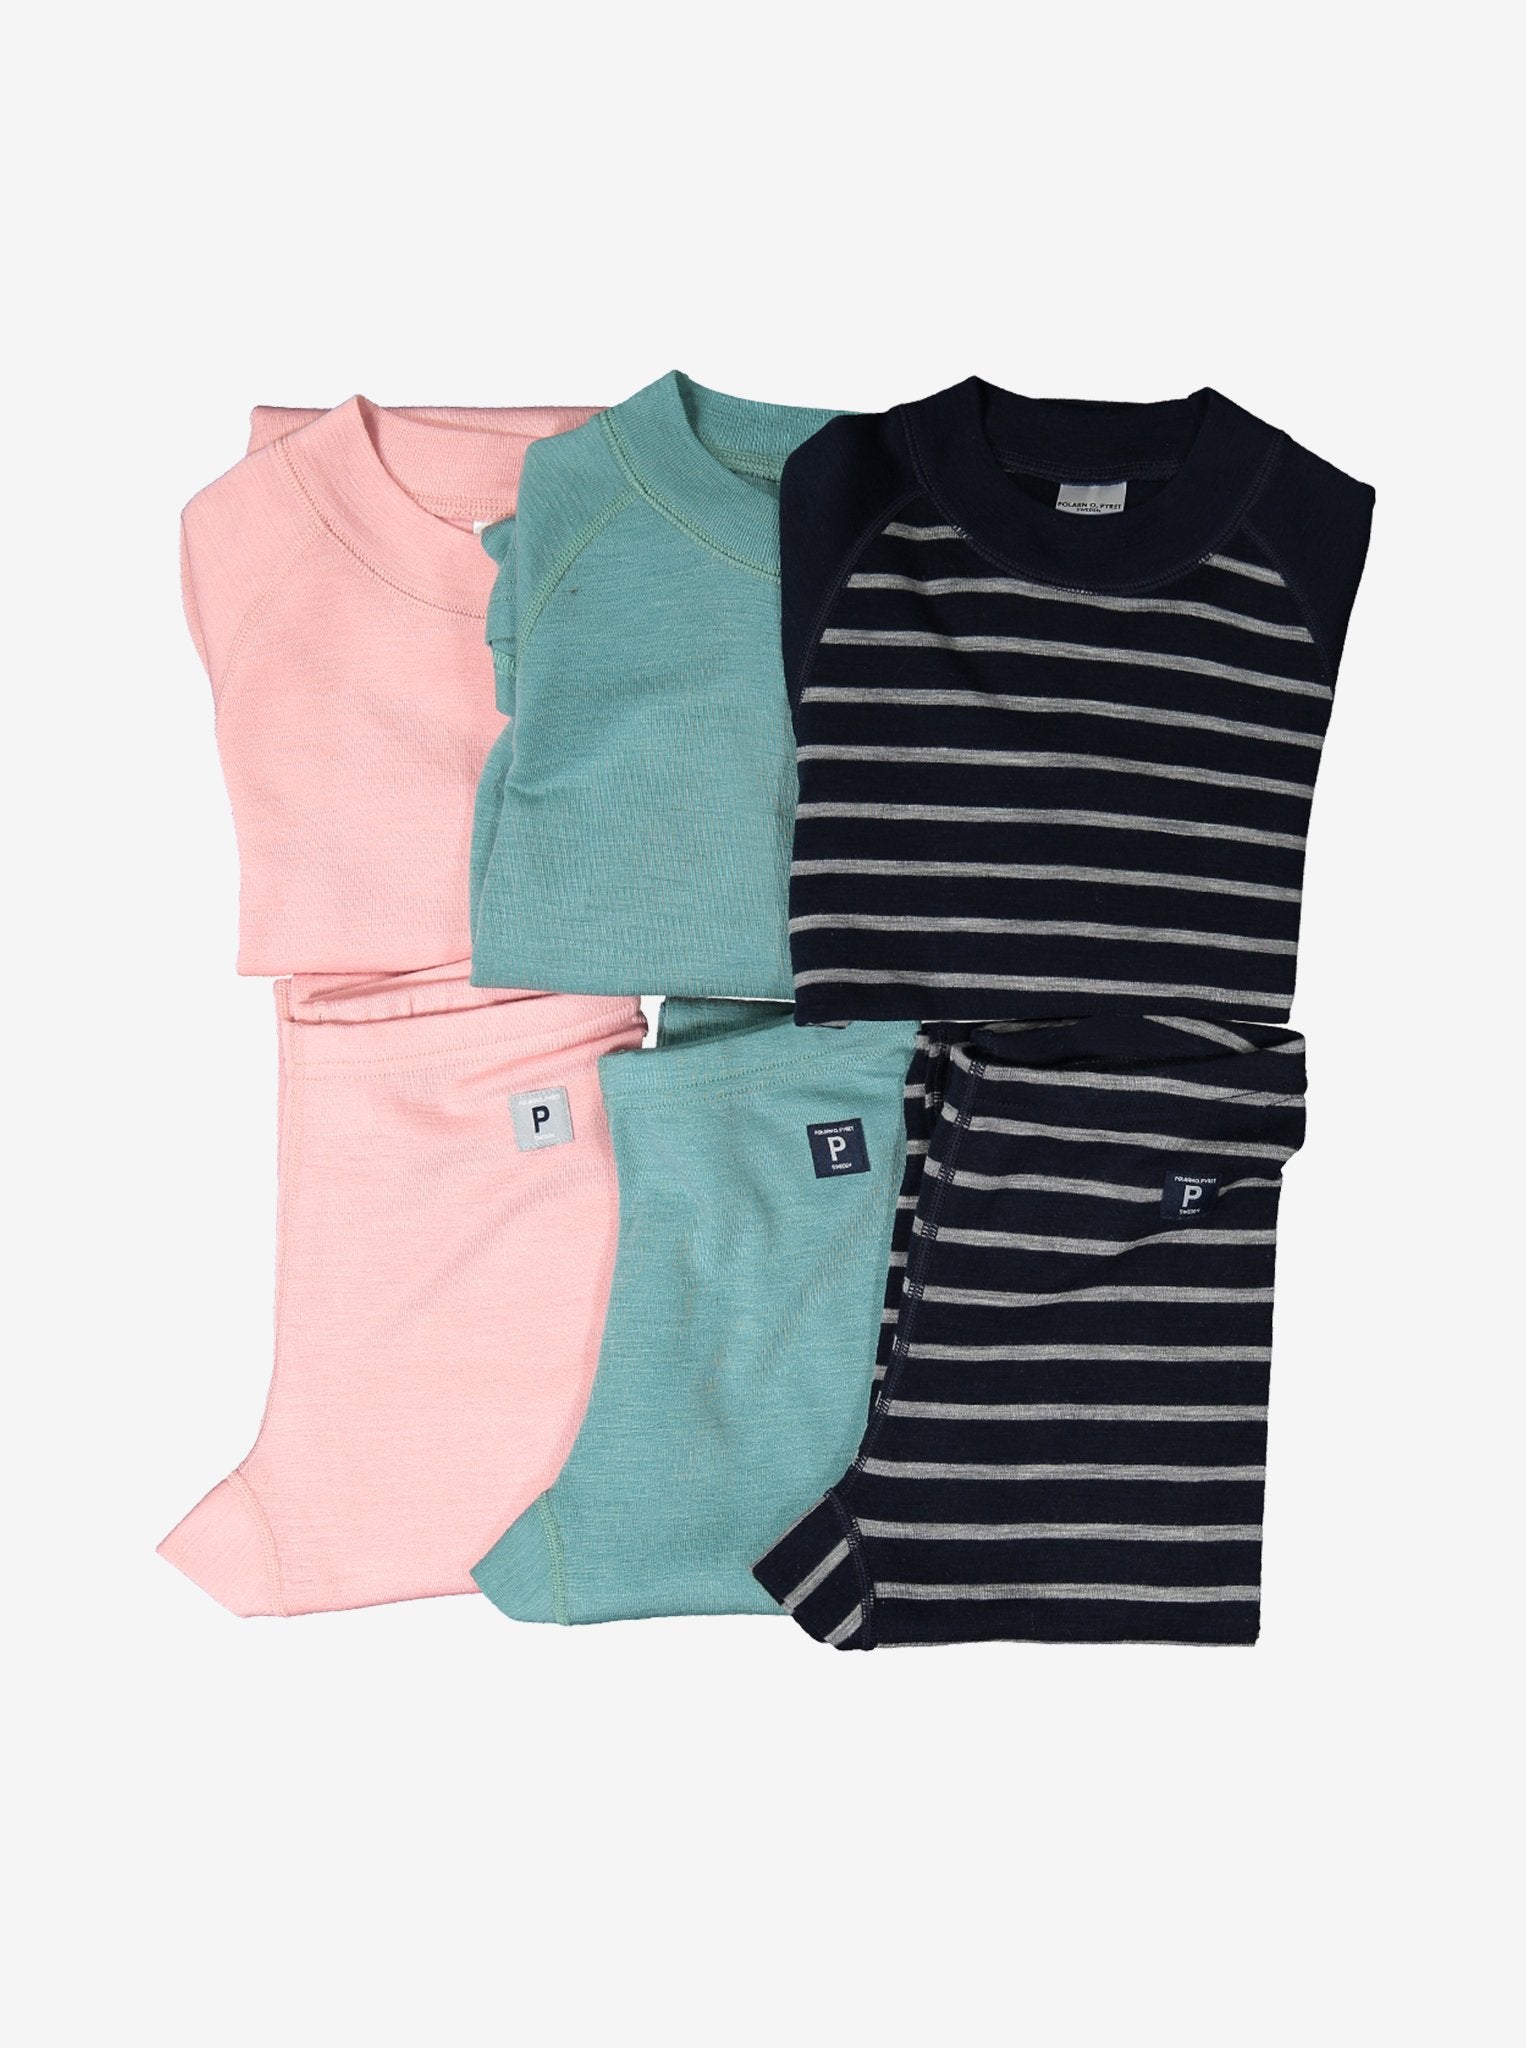 Pink, blue, and striped sets of thermal merino long johns for kids with matching top